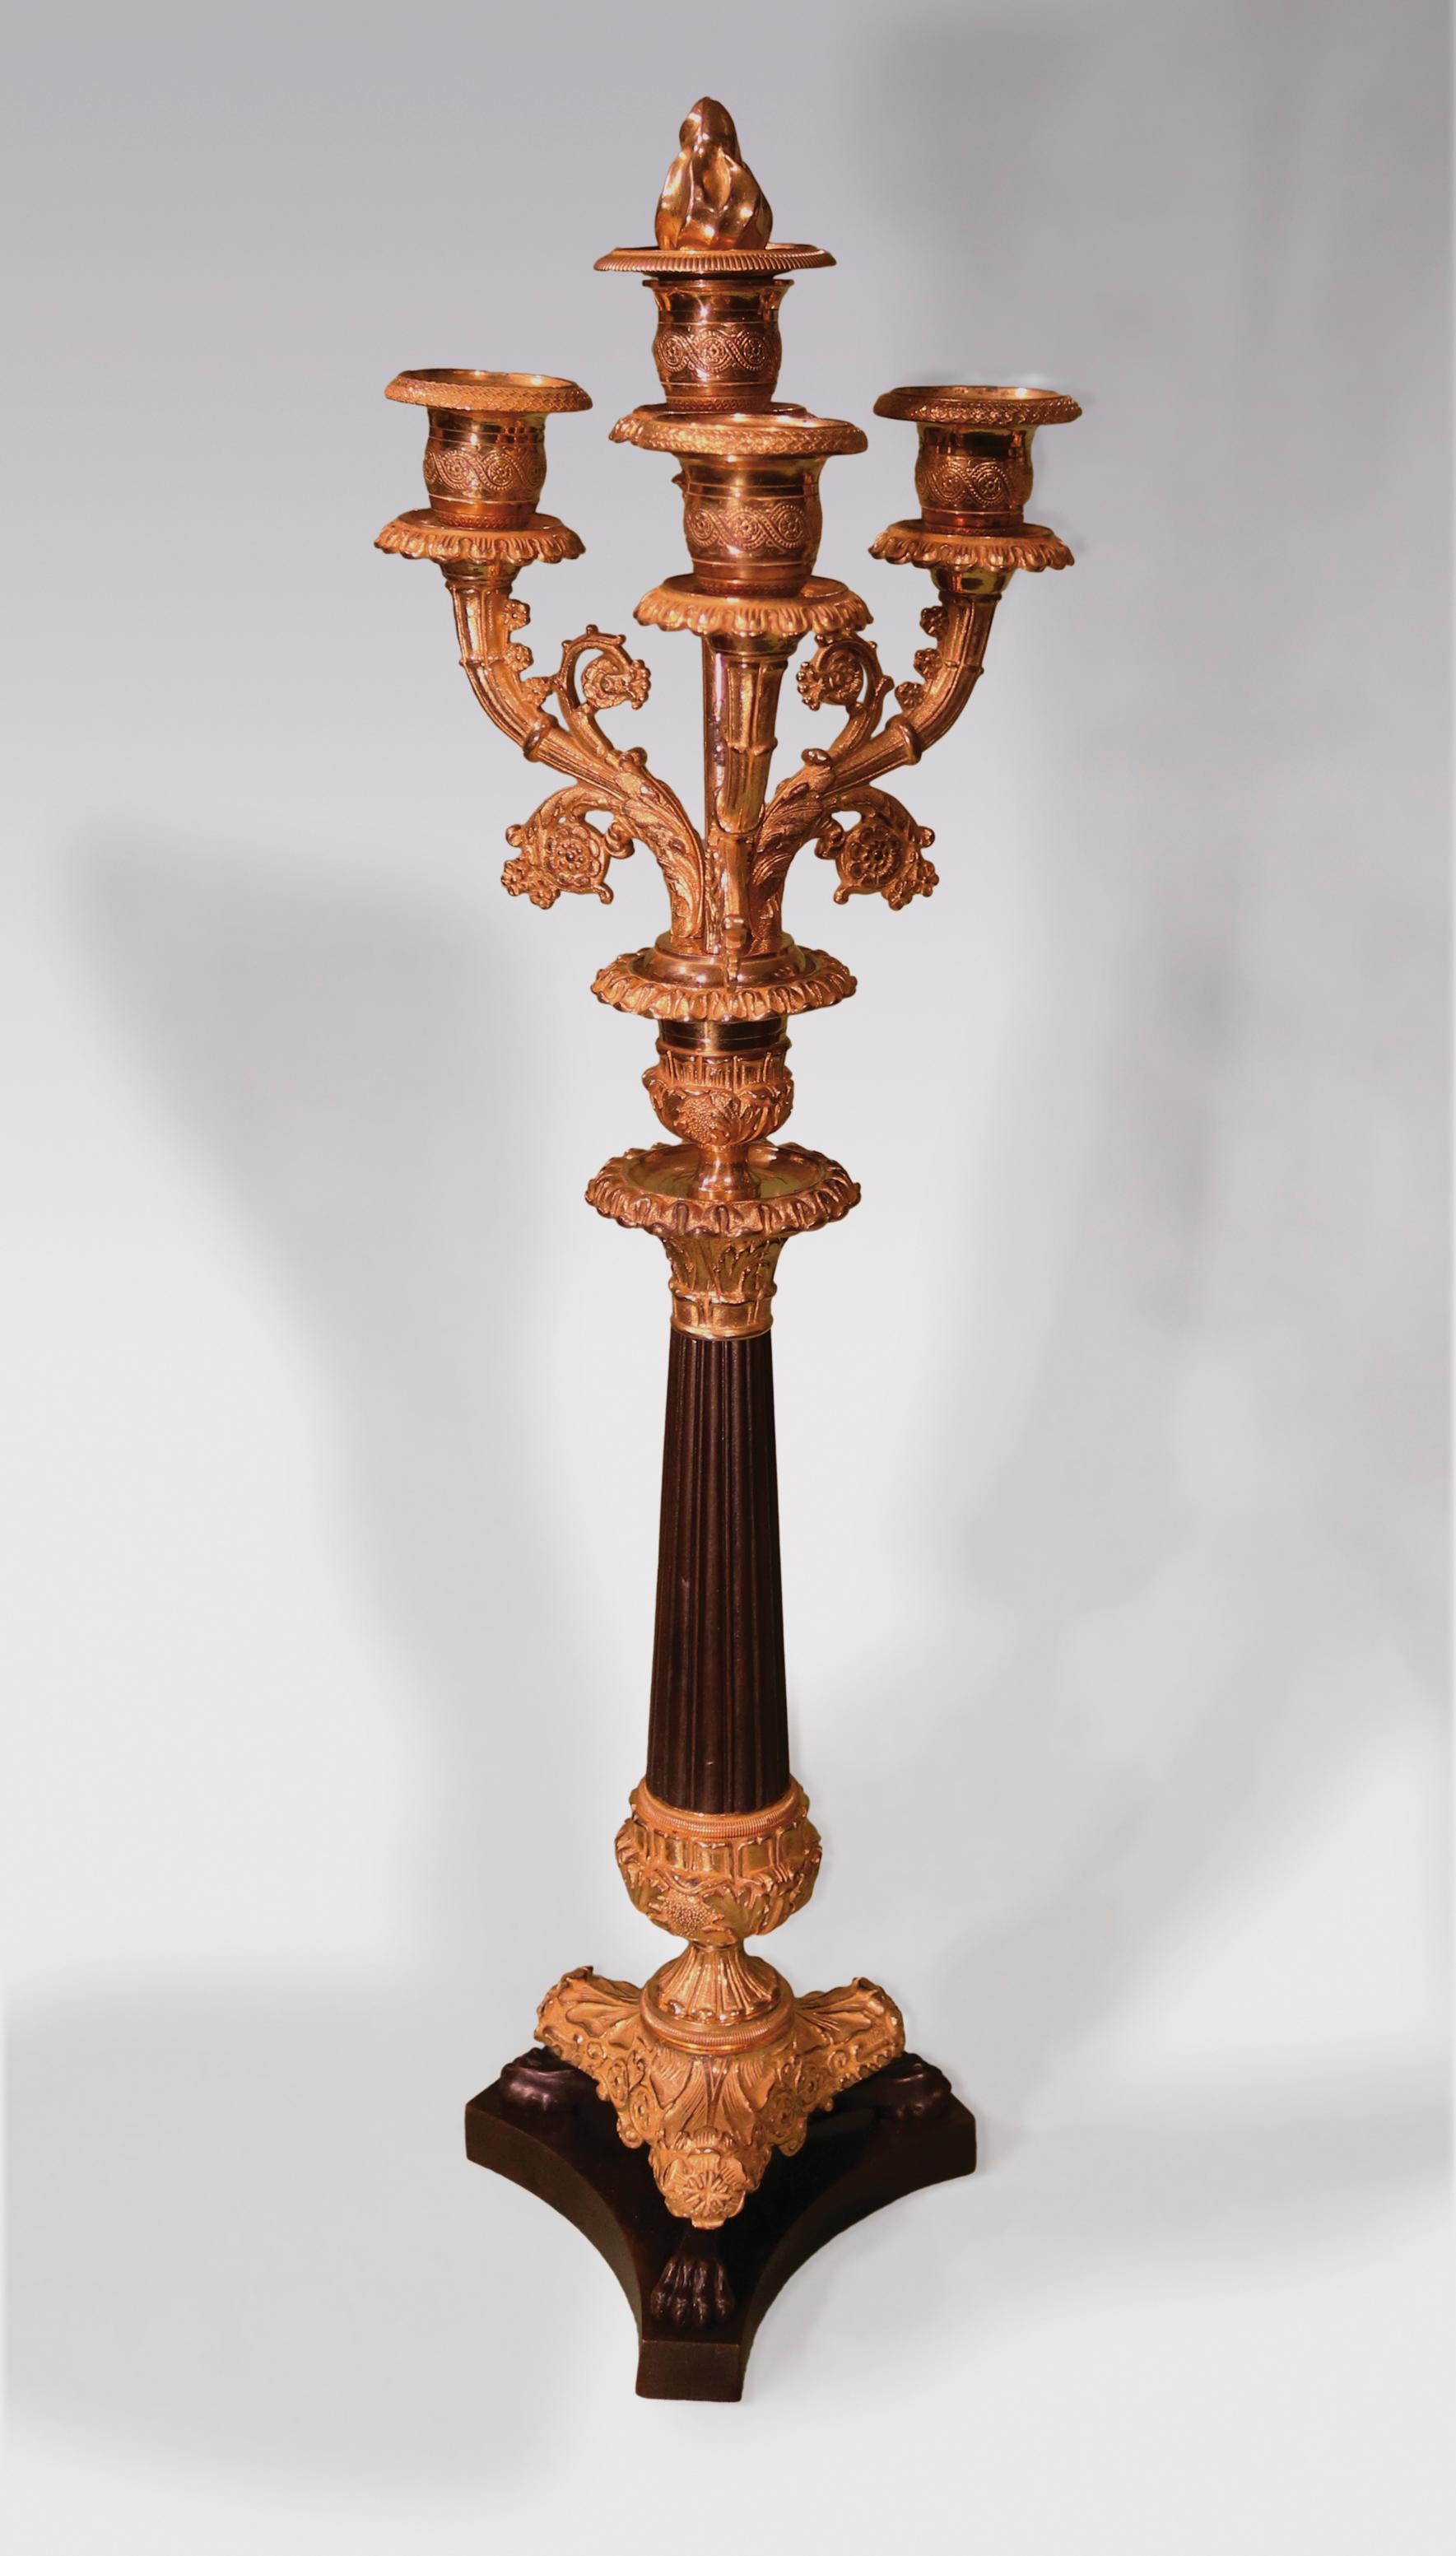 A pair of early 19th century bronze and ormolu 4-light candelabras with central finials, having leaf and spiral decorated nozzles raised on scrolled cornucopiae supported on reeded, tapering stems with lion’s paw feet ending on concave tri-form